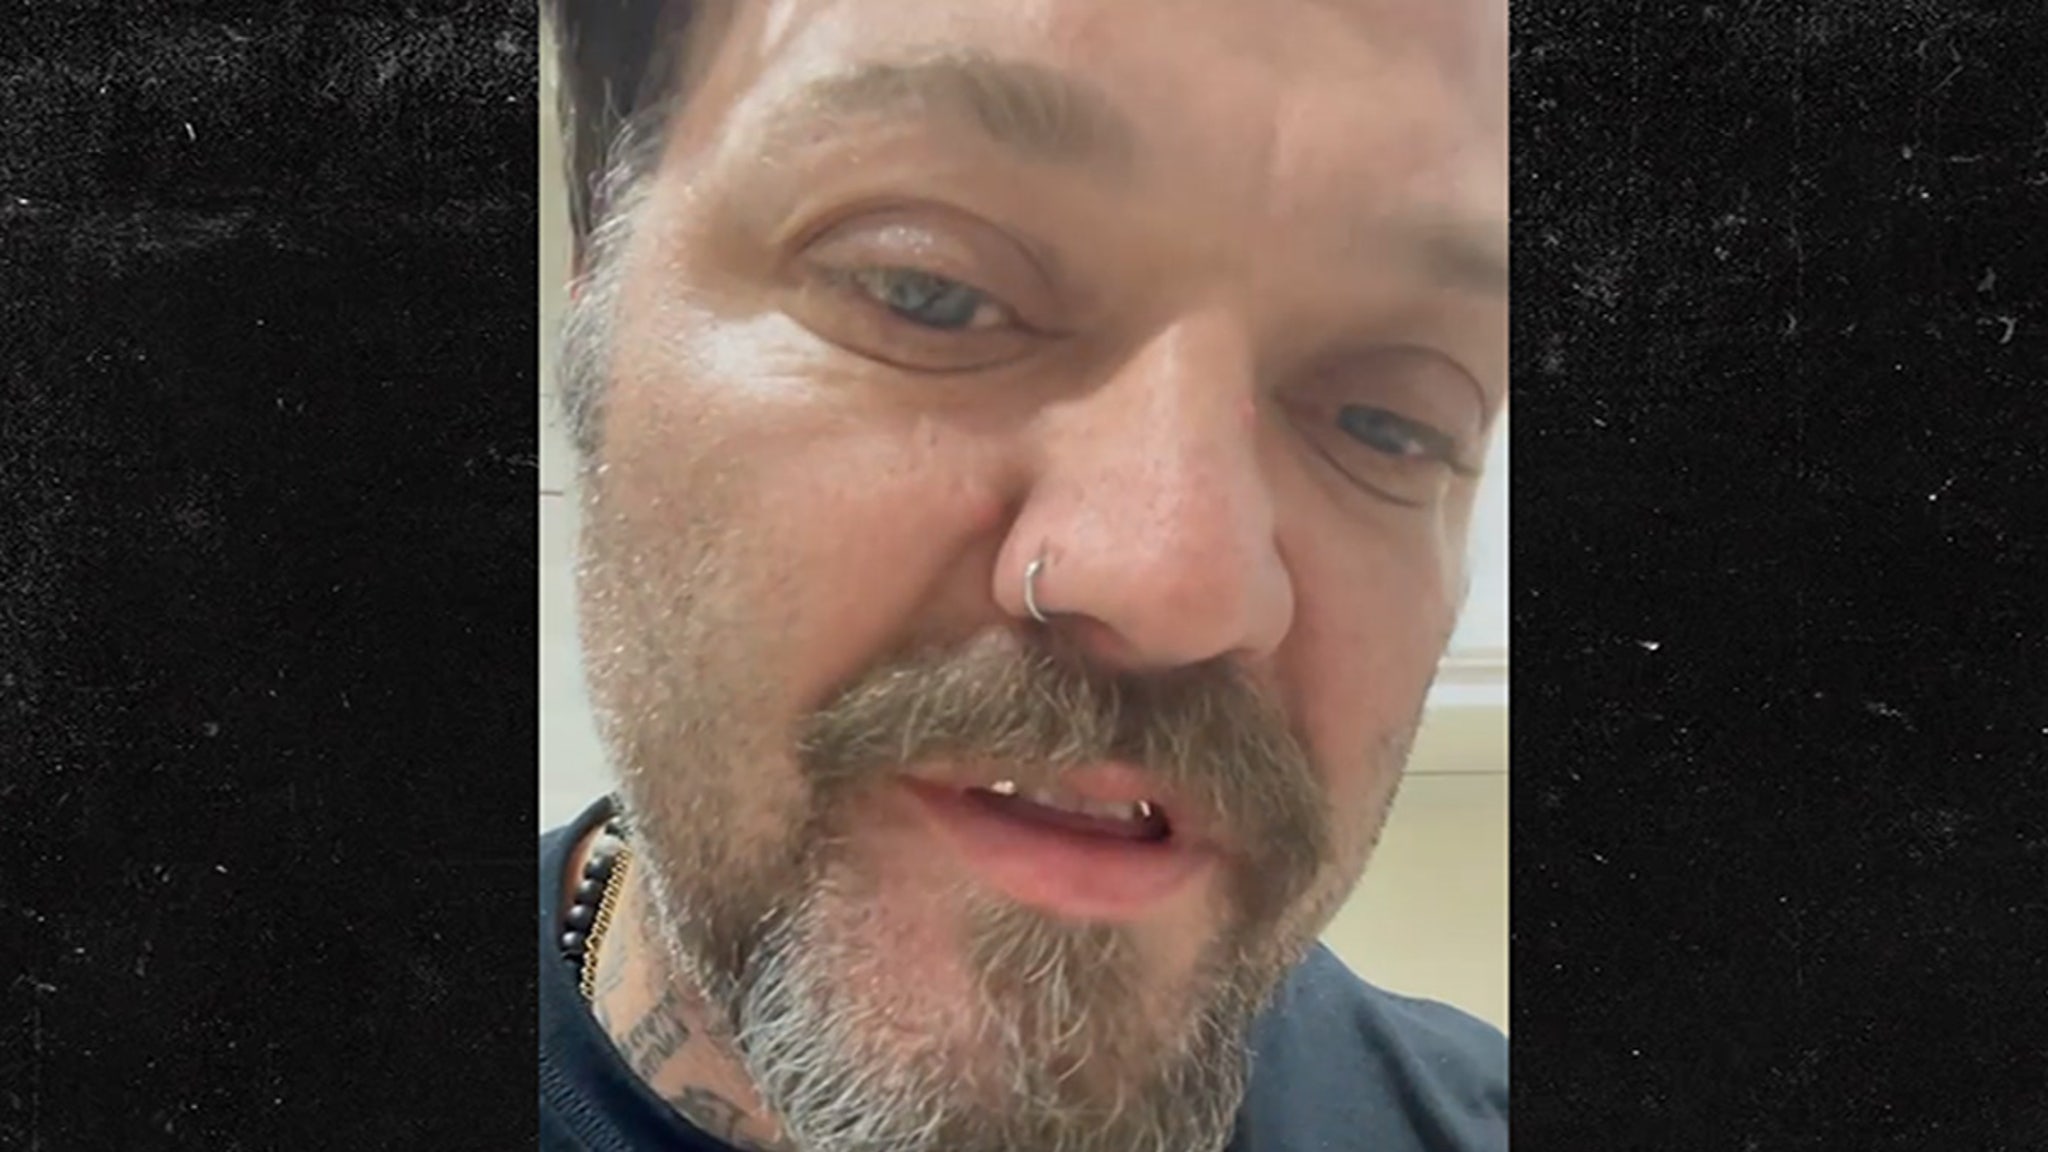 Bam Margera calls for boycott of ‘Jackass 4’ and talks about suicidal thoughts